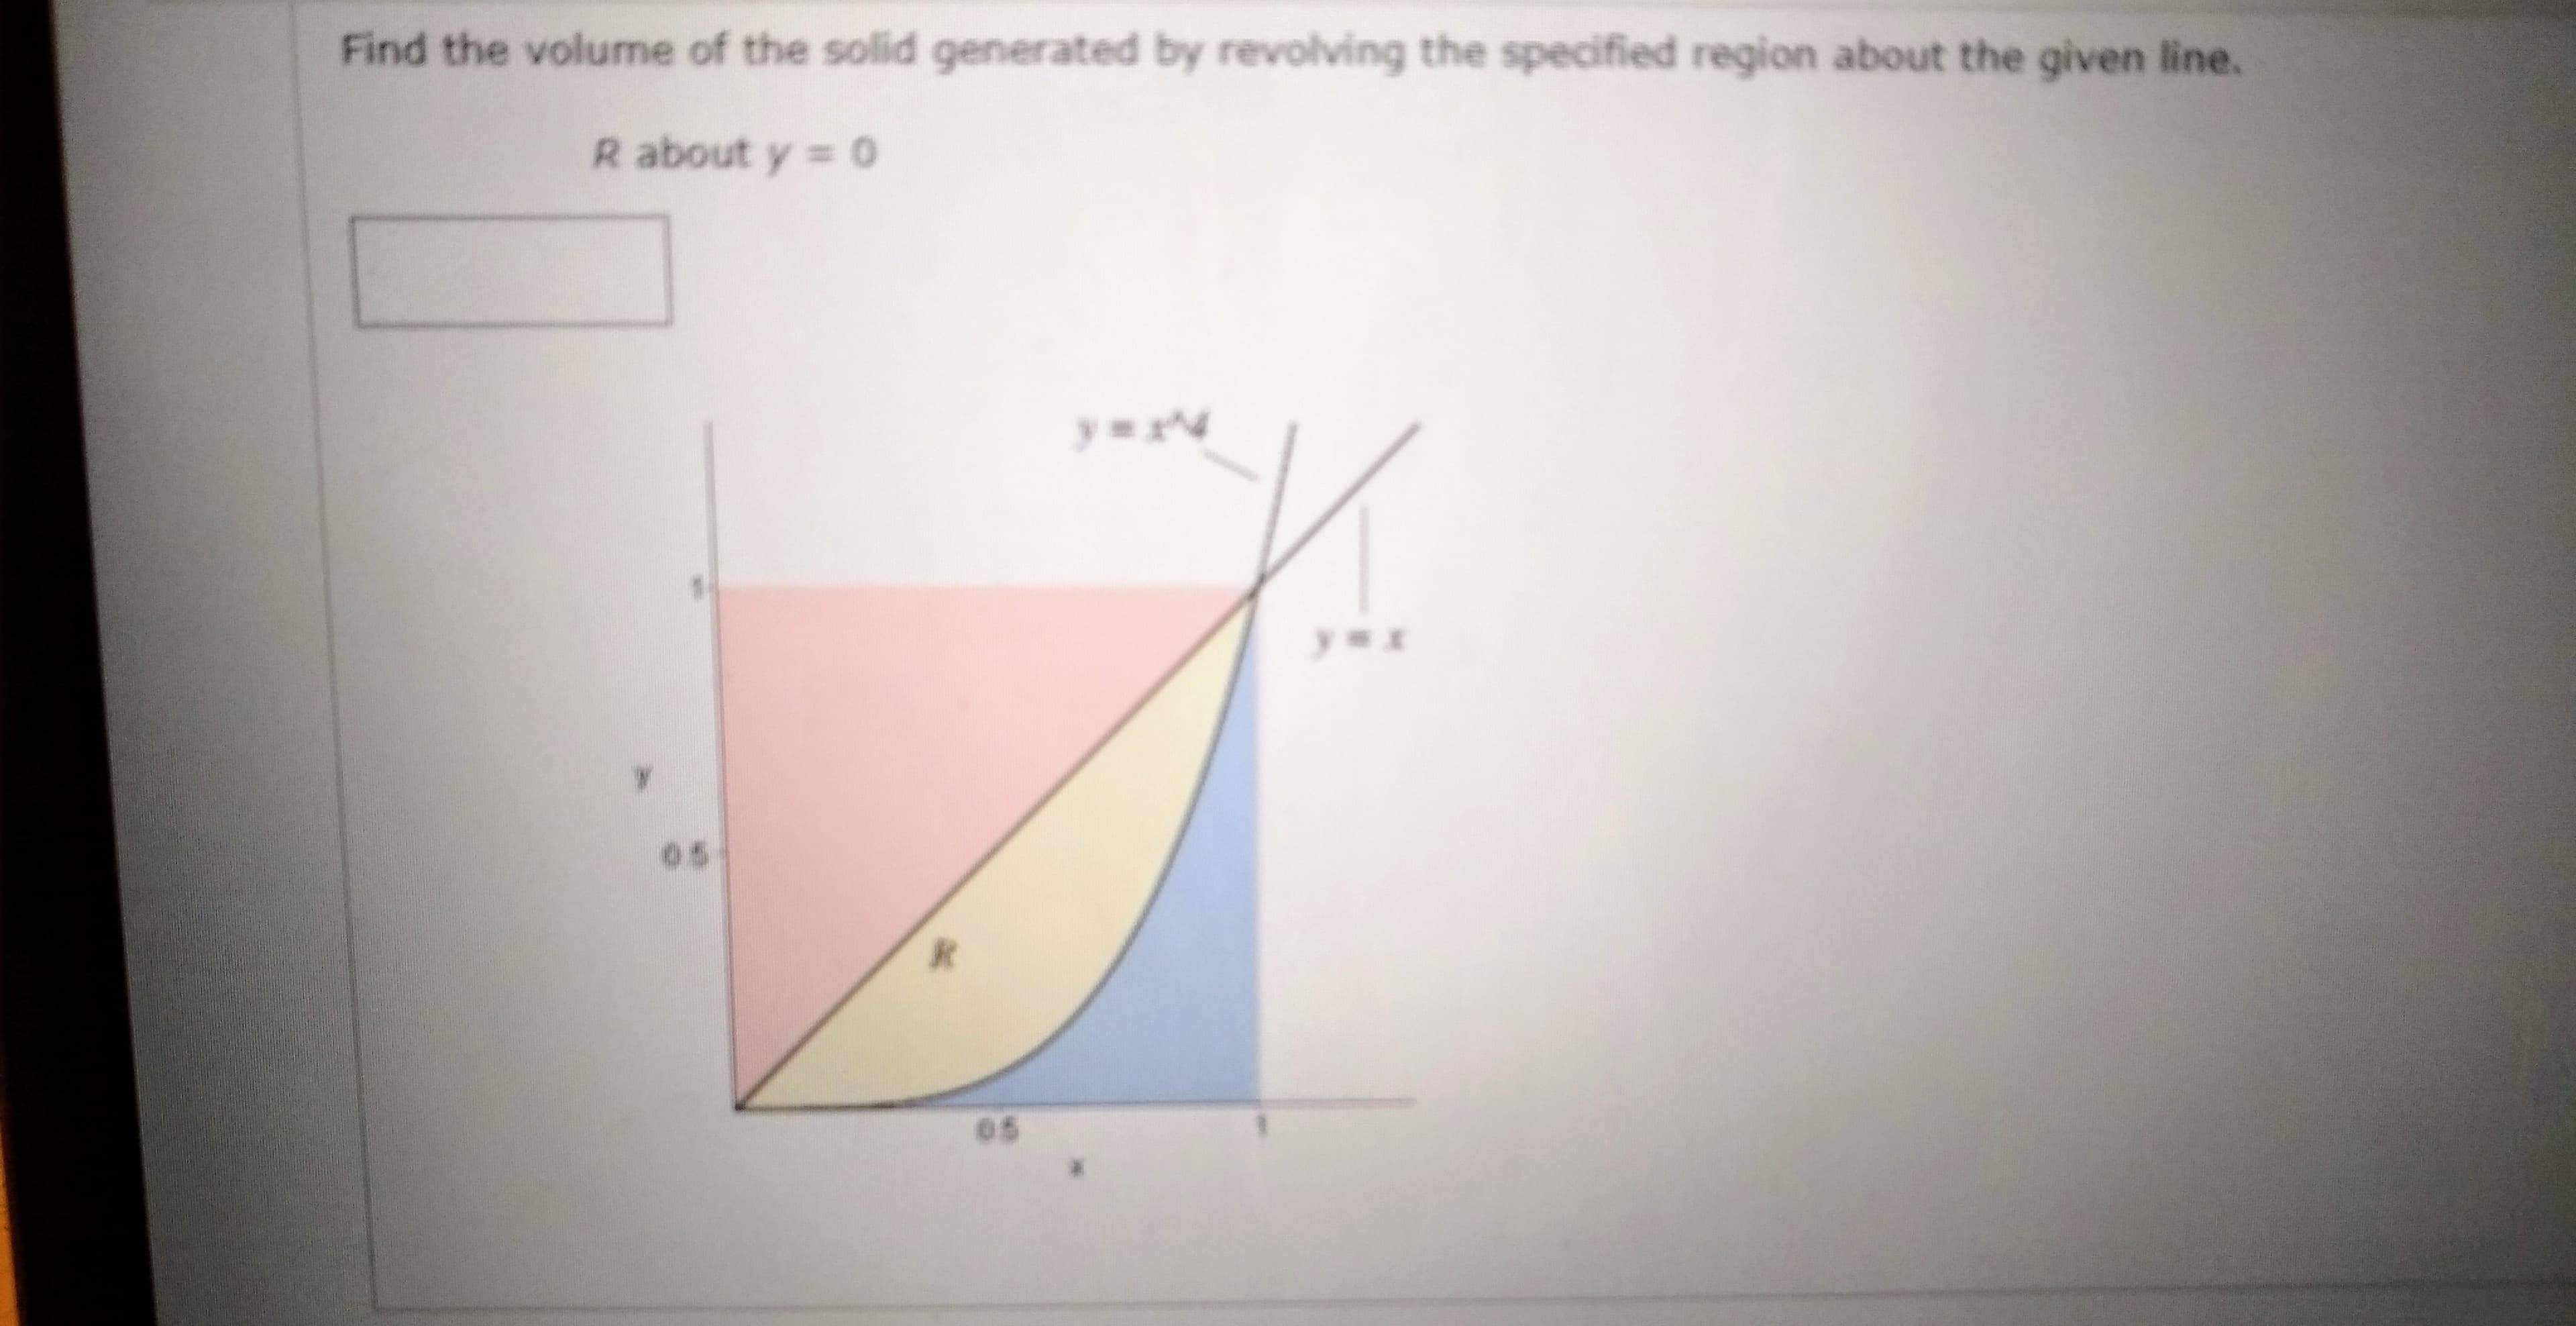 Find the volume of the solid generated by revolving the specified region about the given line.
R about y = 0
05
05
